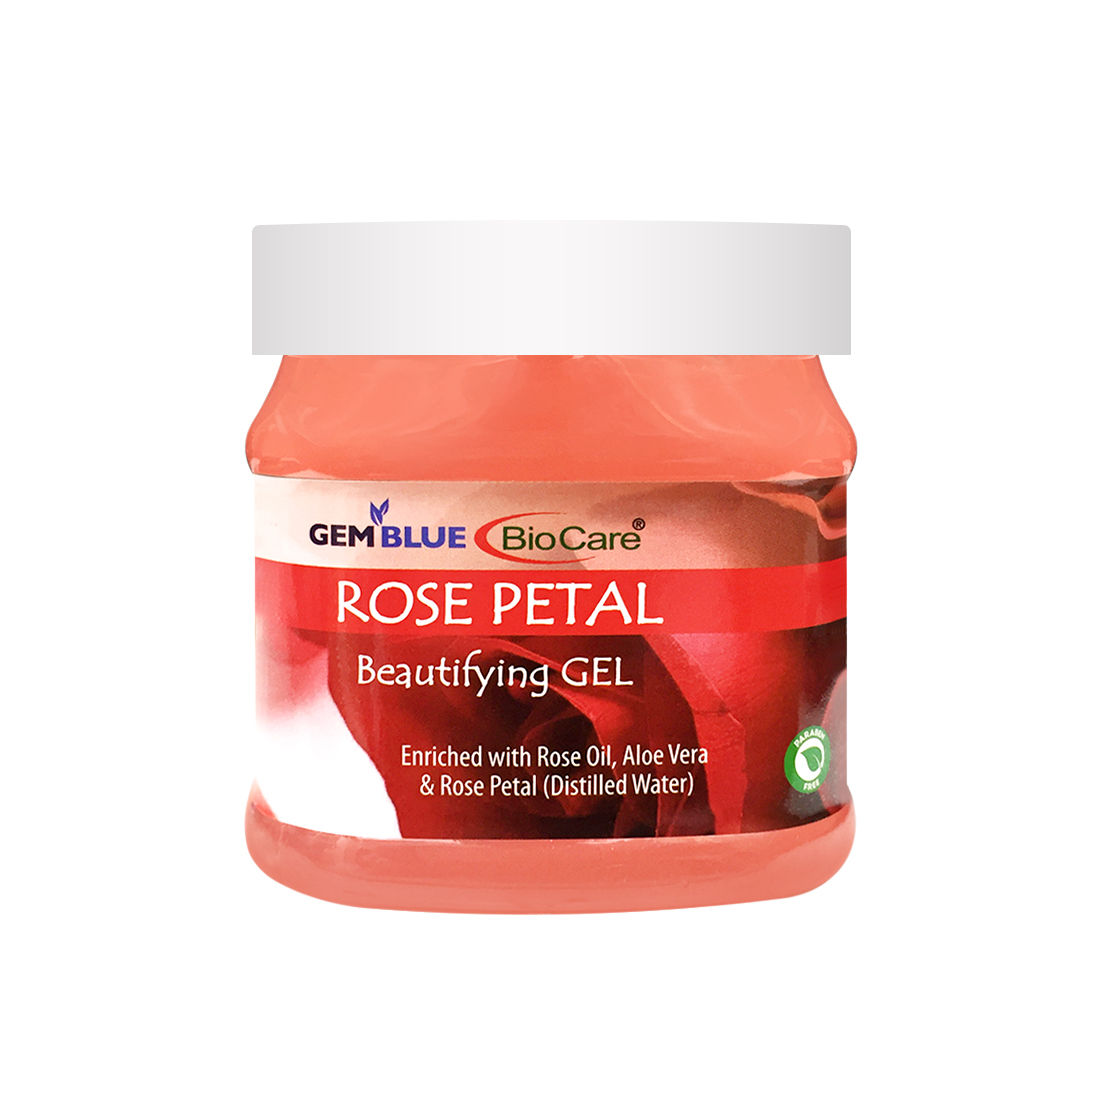 Buy Gemblue Biocare Rose Petal Skin Beautifying Gel Enriched with Rose Oil, Aloevera and Rose Petal, Suitable for All Skin types - 500ml - Purplle